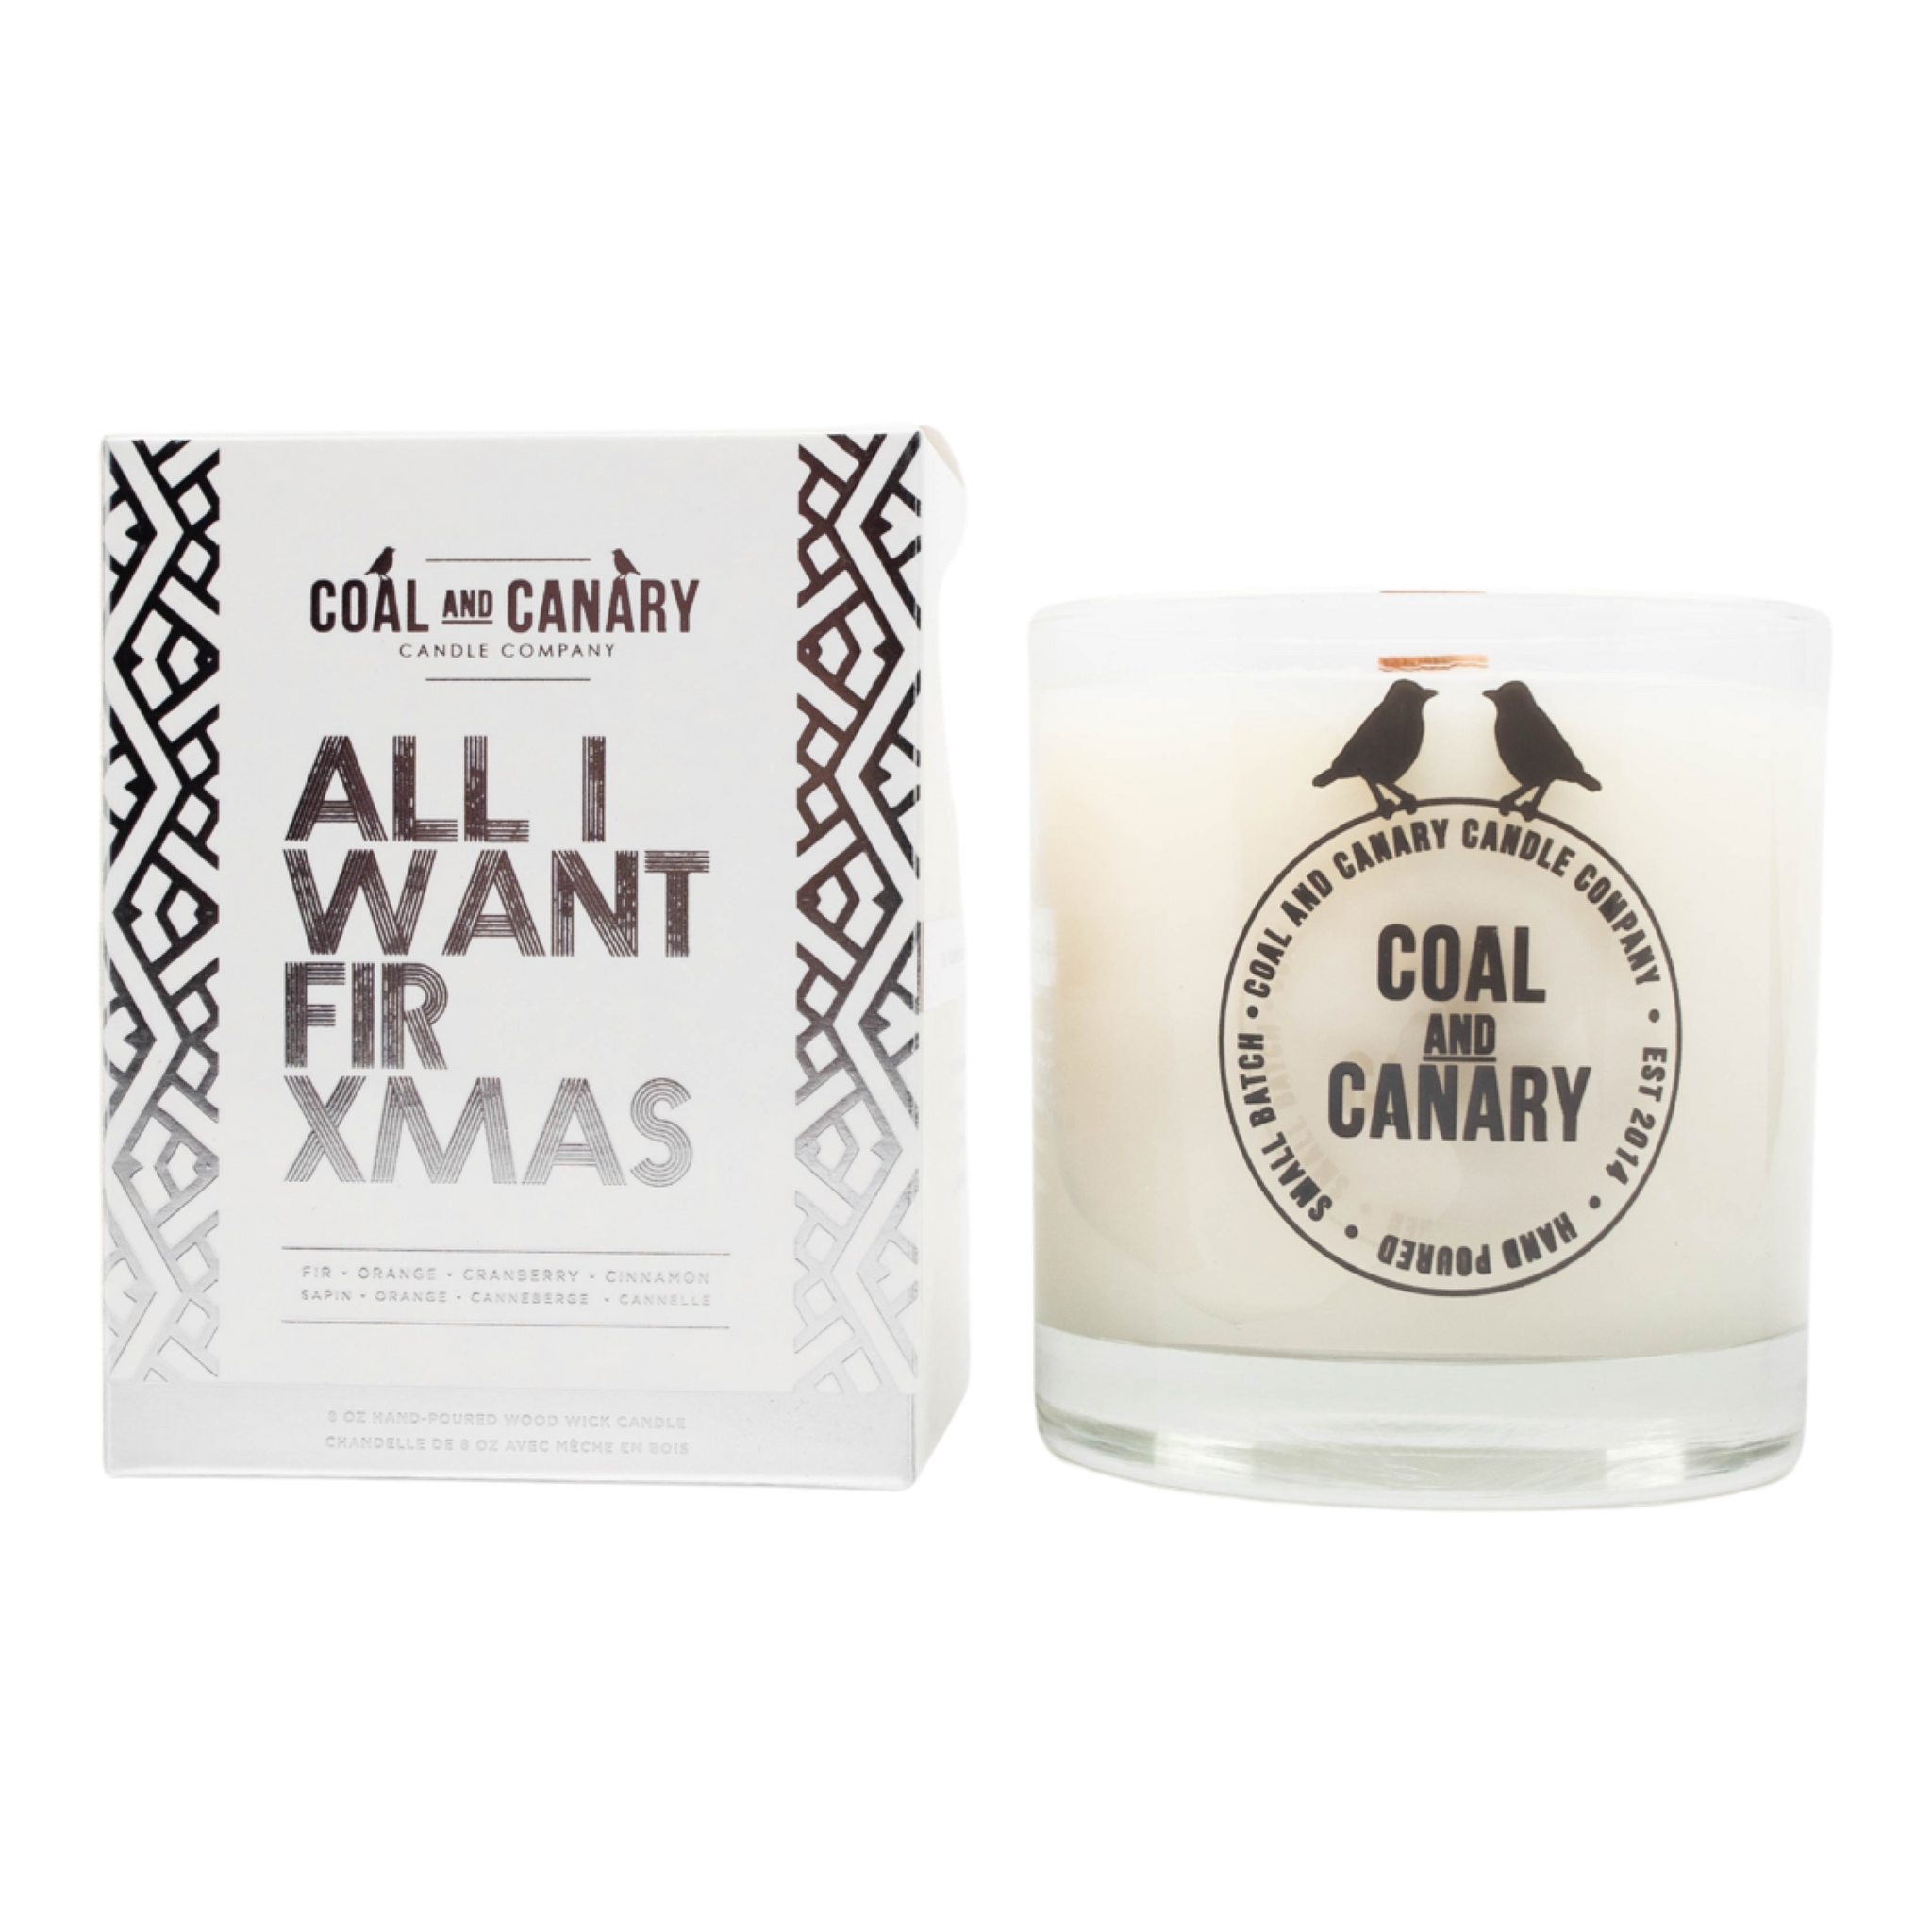 All I Want Fir Xmas Candle Holiday Collection